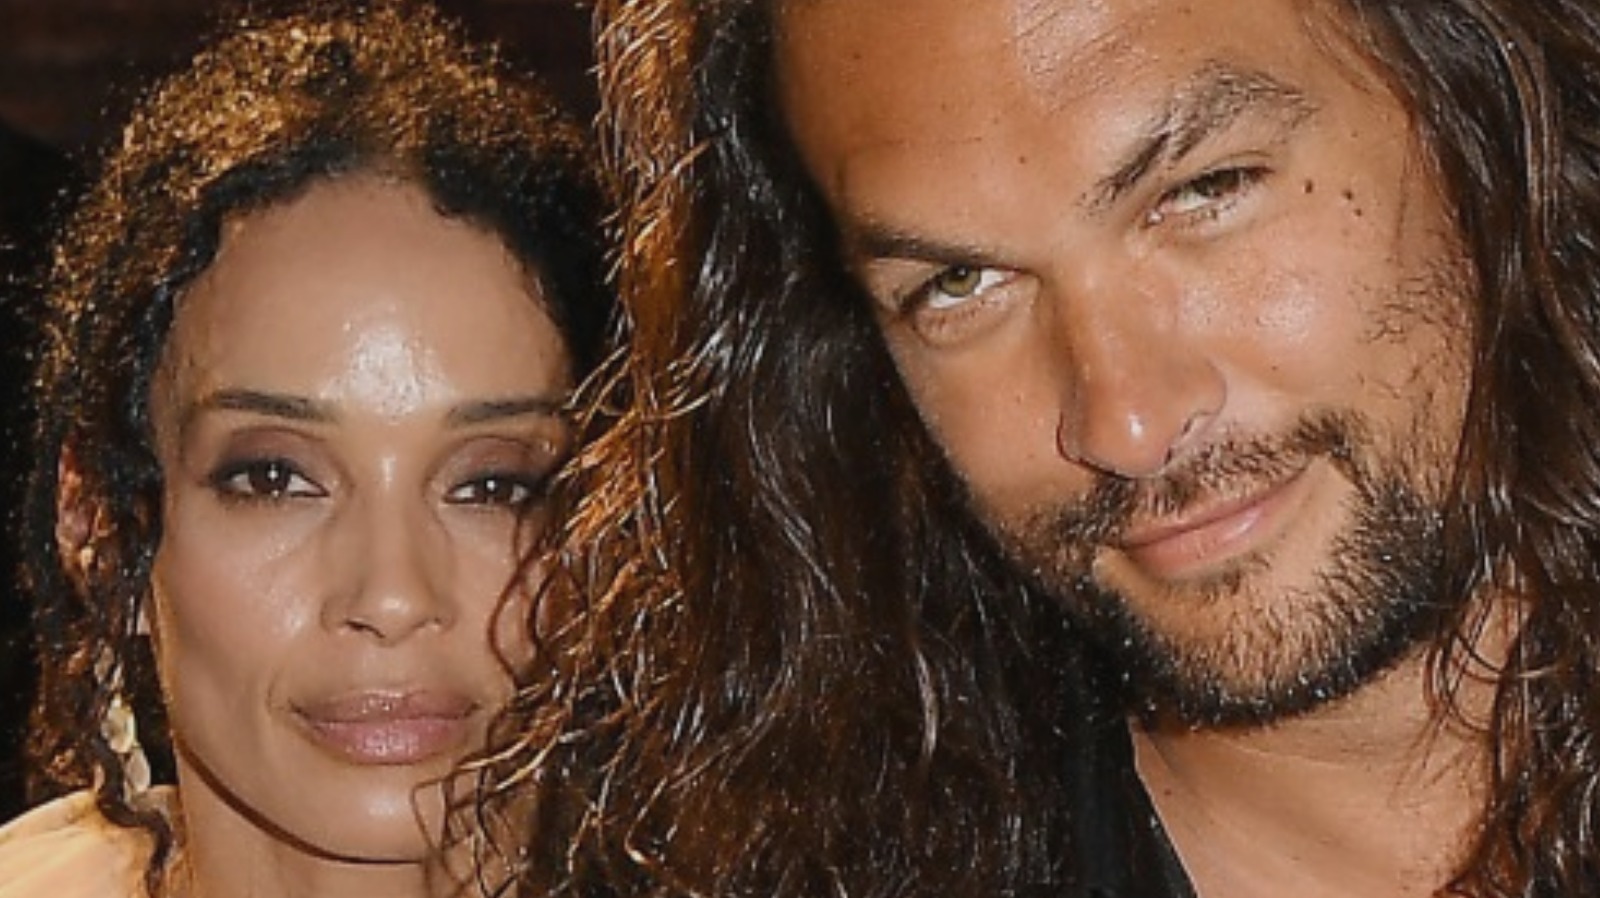 Signs That There Was Trouble for Lisa Bonet and Jason Momoa